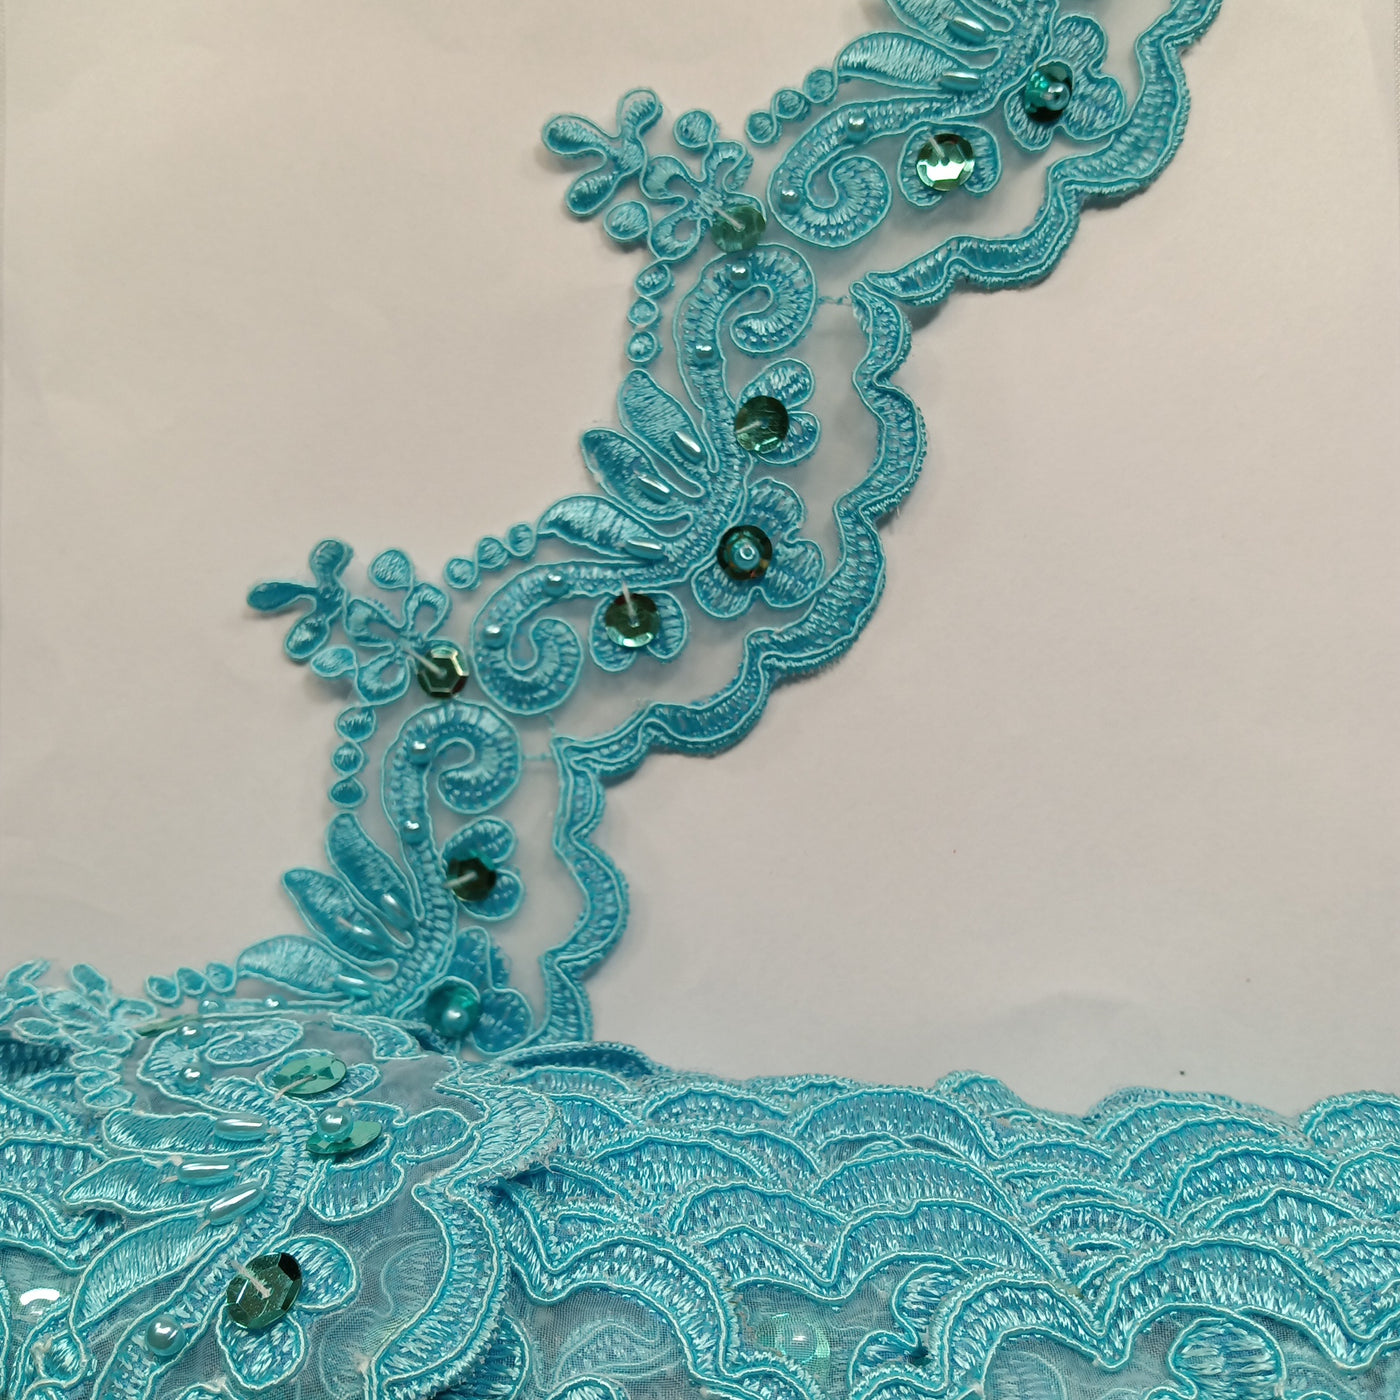 Corded, Beaded & Embroidered Aqua Trimming. Lace Usa